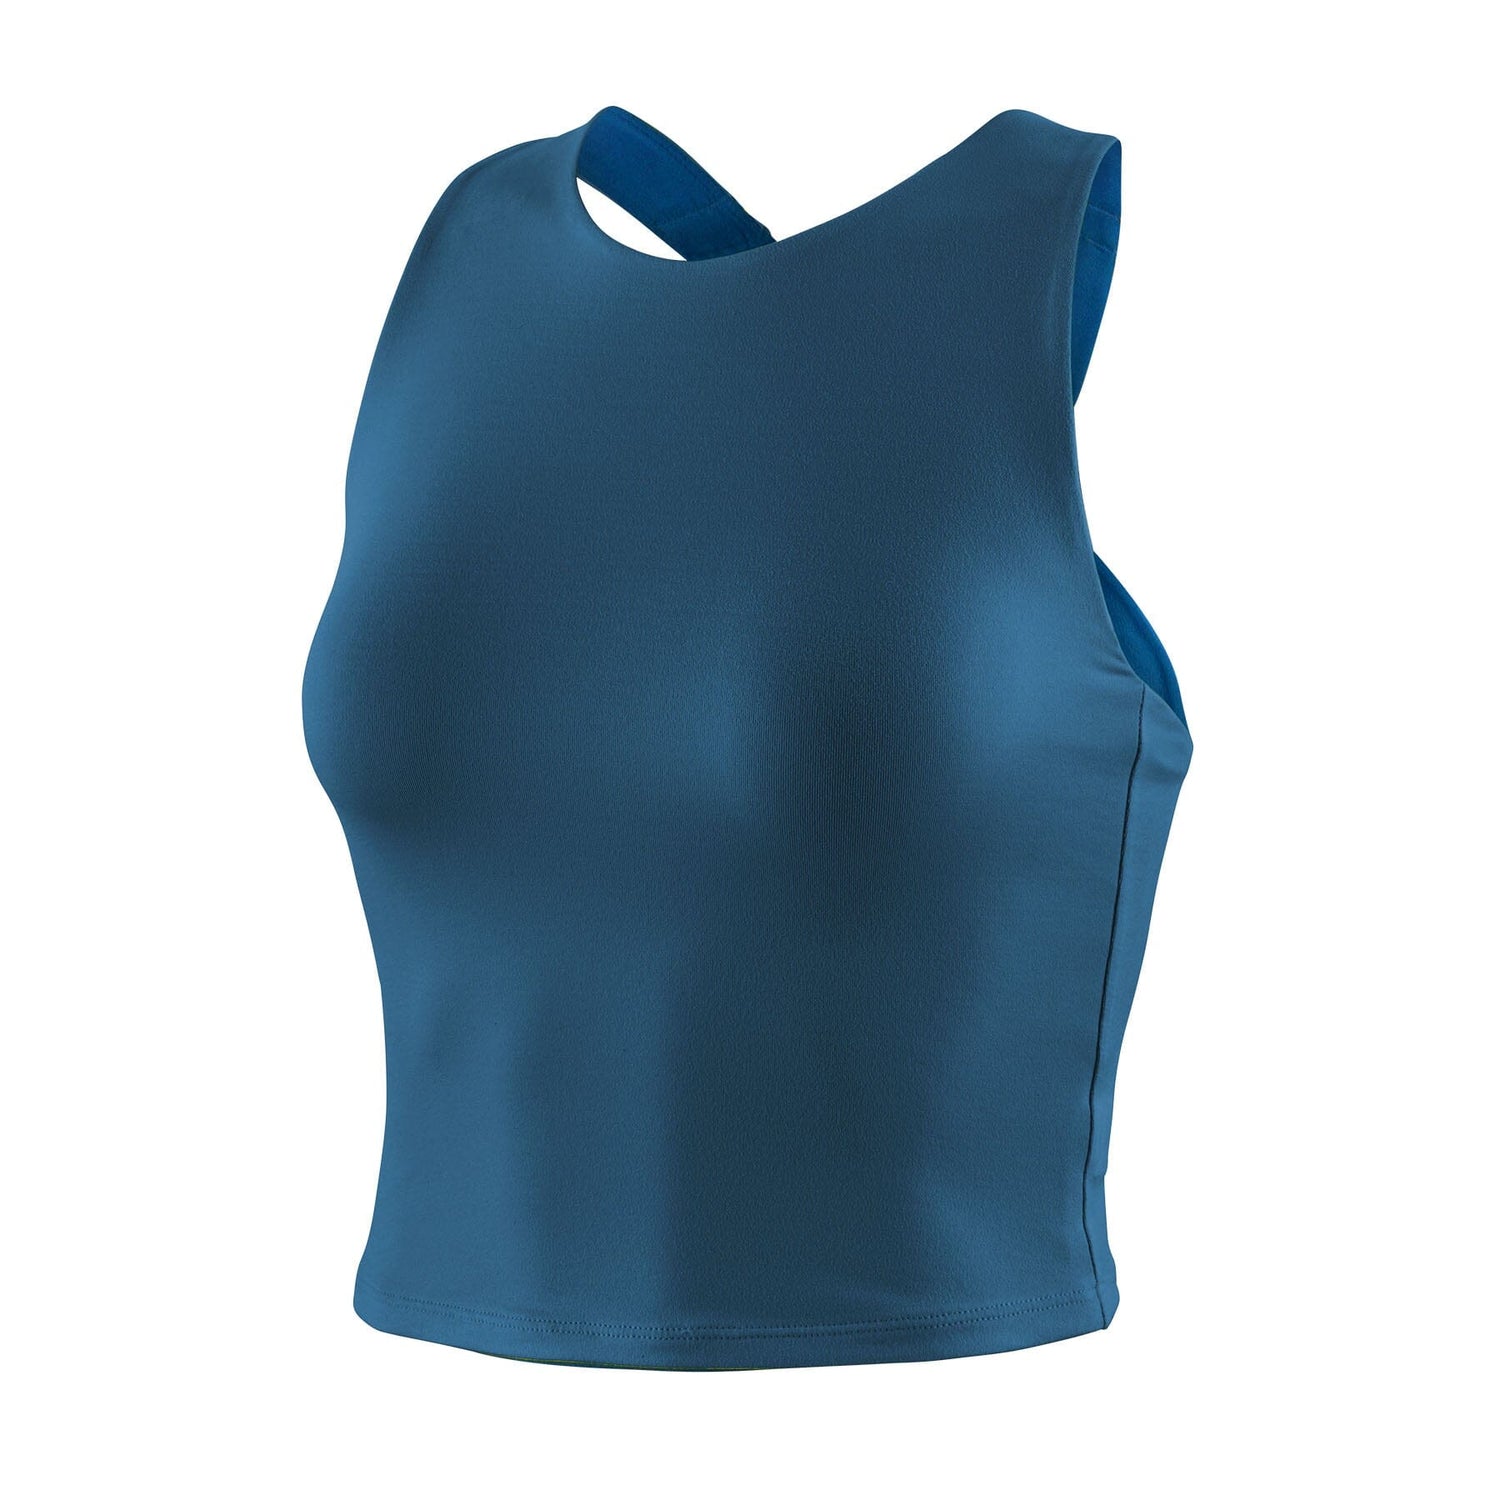 Patagonia - W's Reversible Tank top - Recycled polyester - Weekendbee - sustainable sportswear